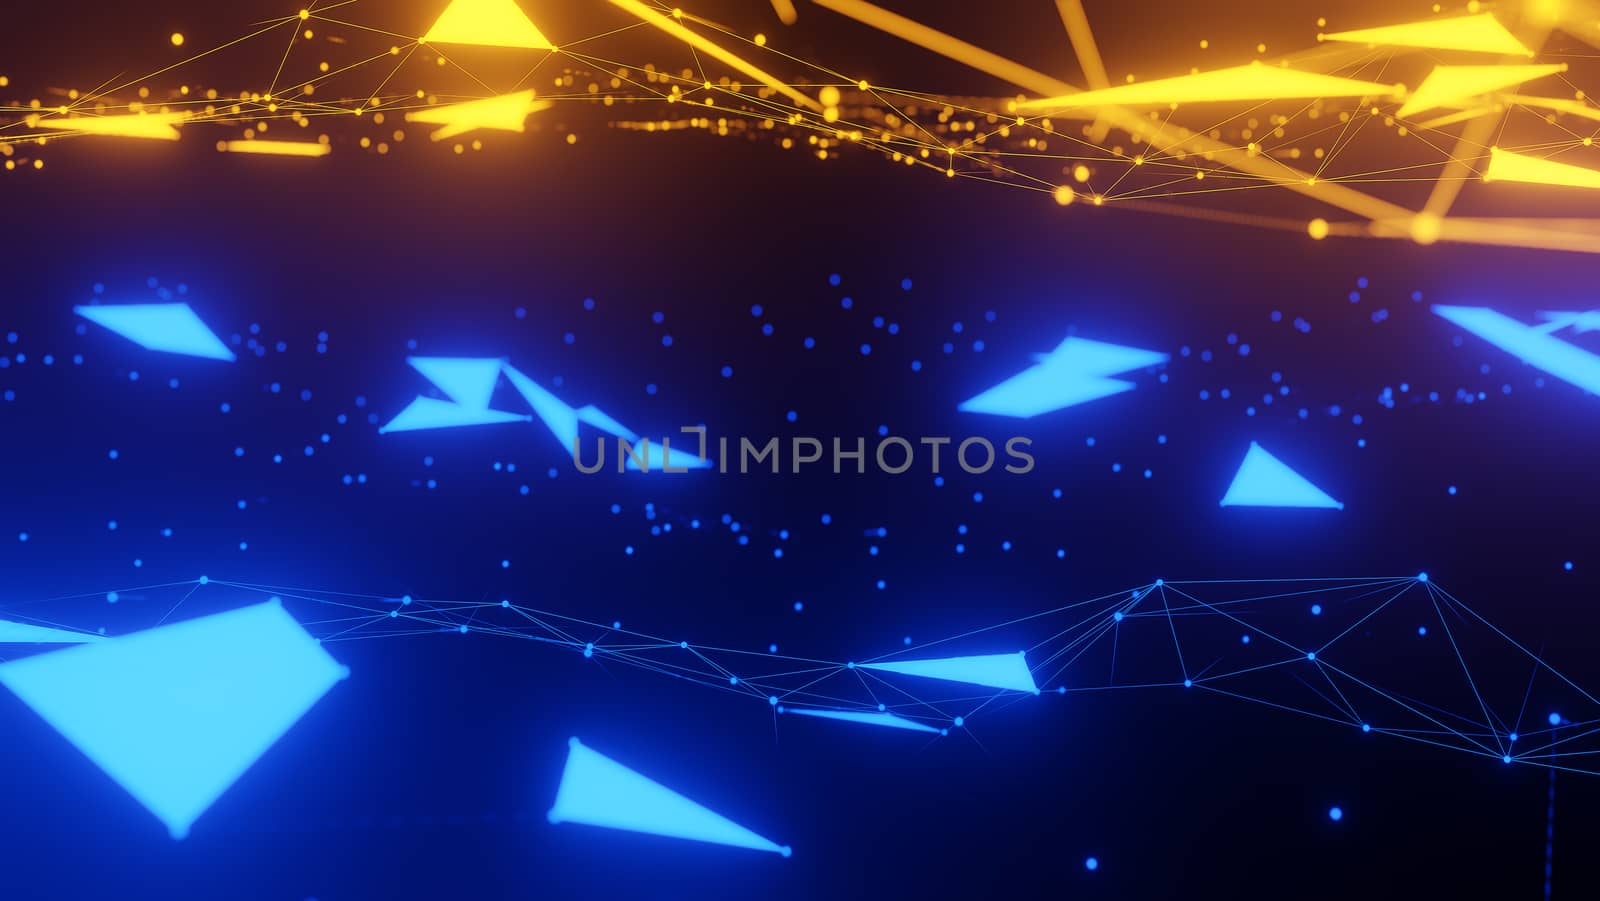 Abstract plexus blue and orange geometric shapes.,Communication And Technology Network Background.,Connection And Web Concept.,3d model and illustration. by anotestocker